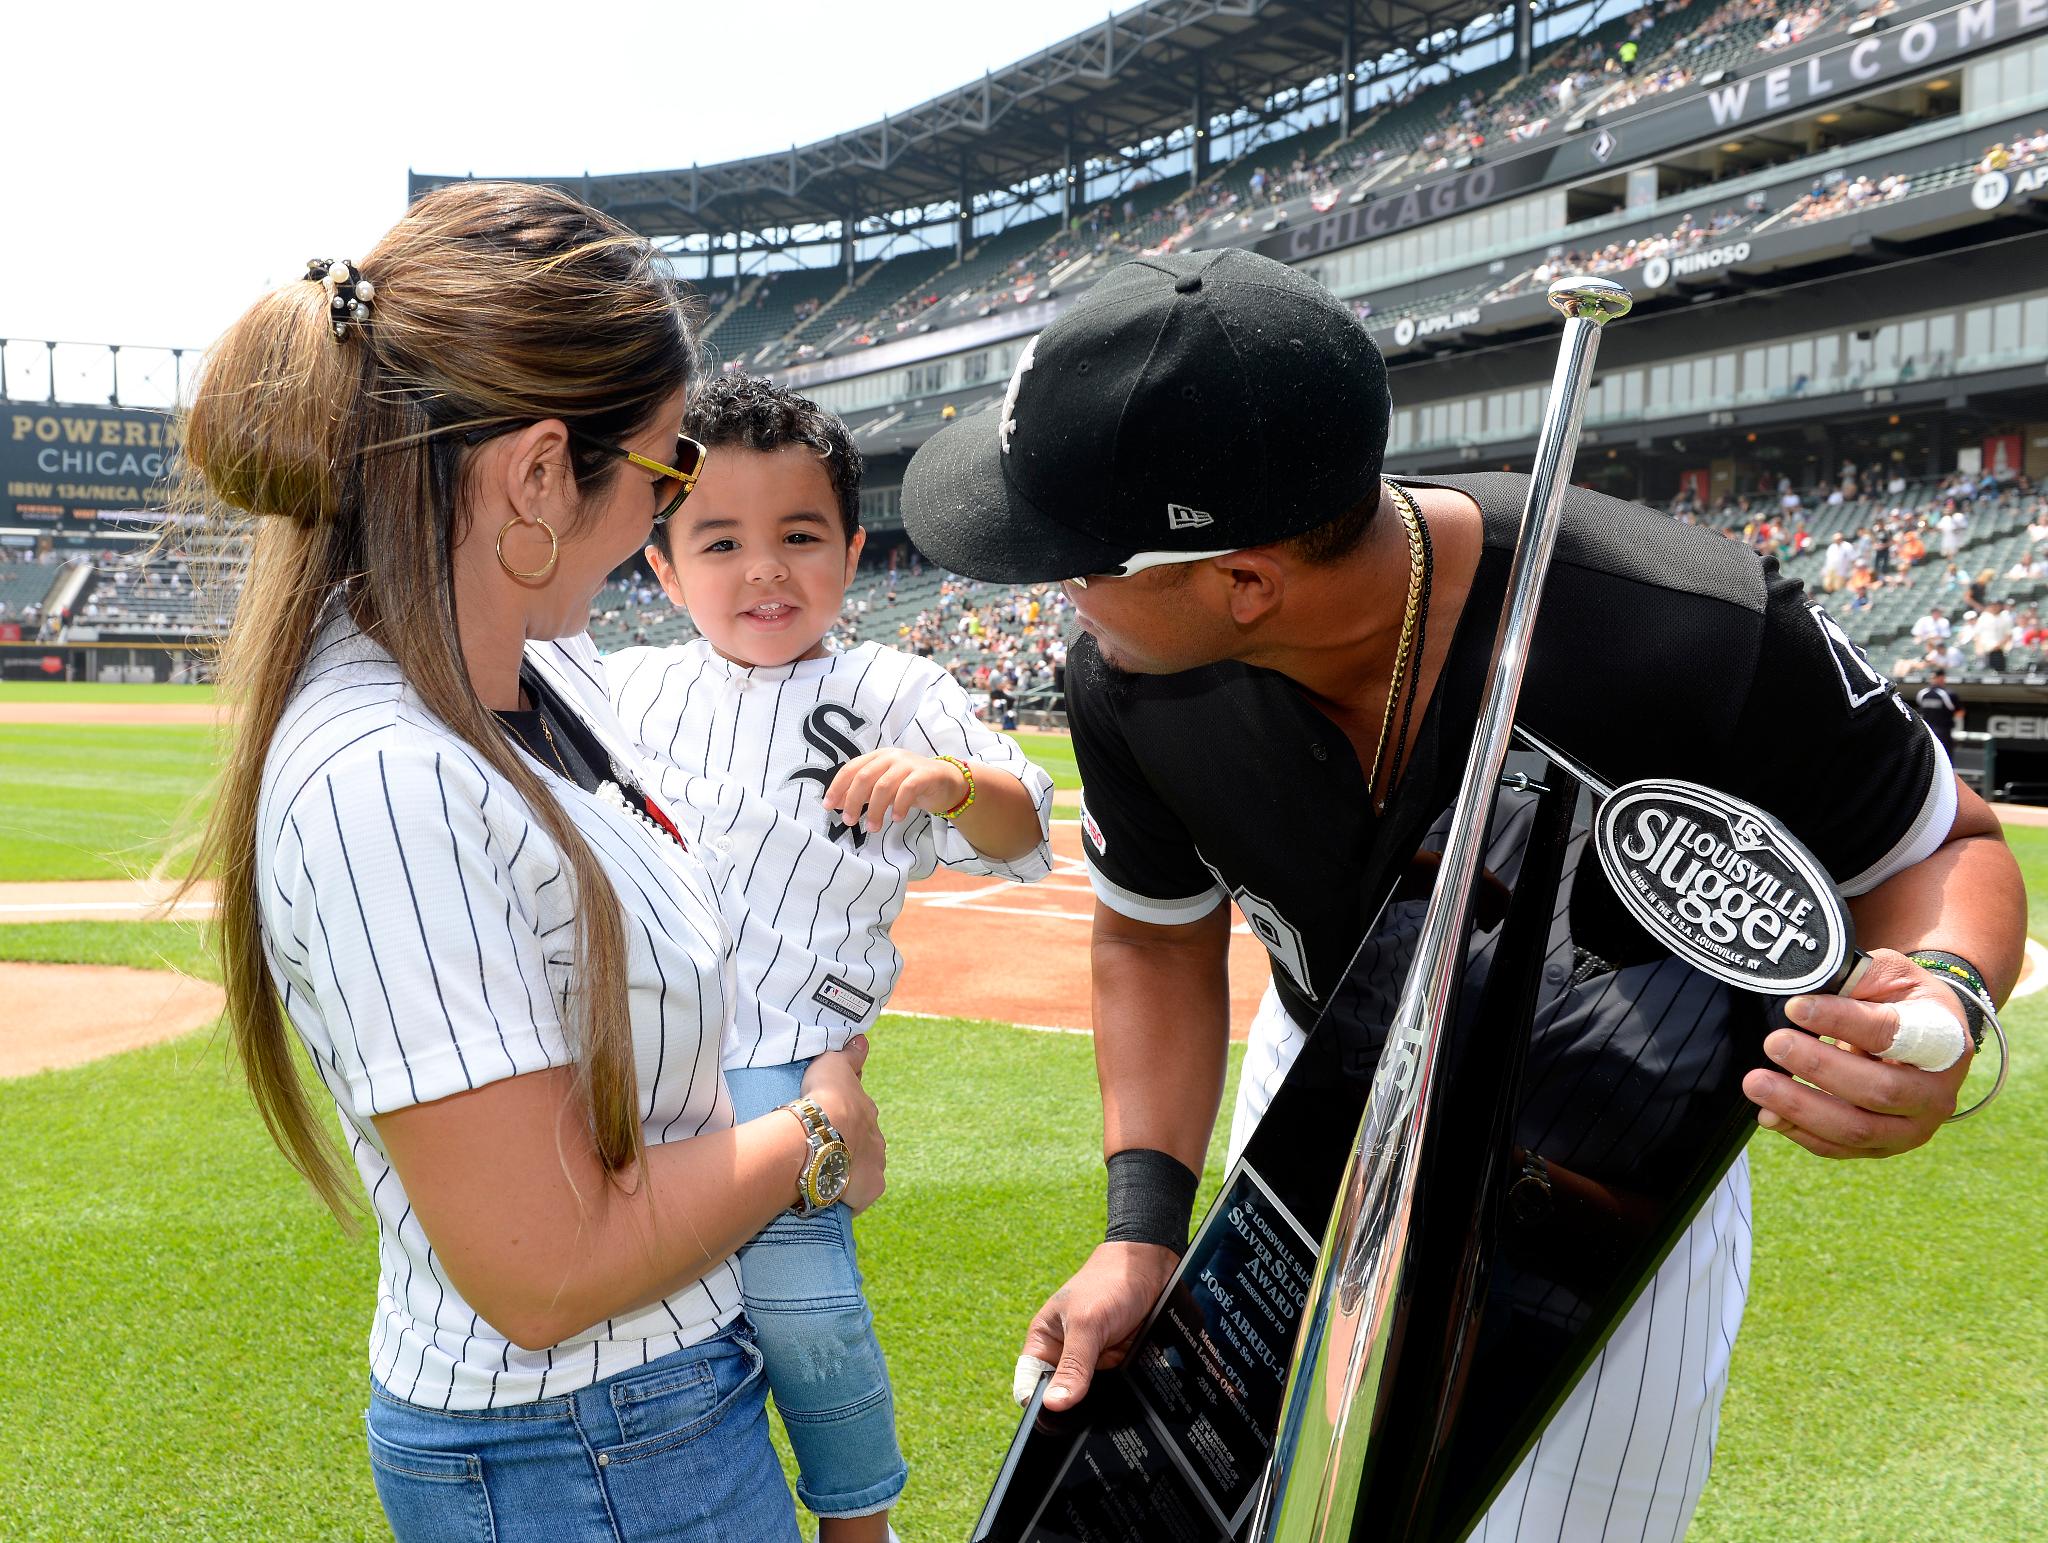 Jose With His Wife And Son After Winning Silver Slugger Award